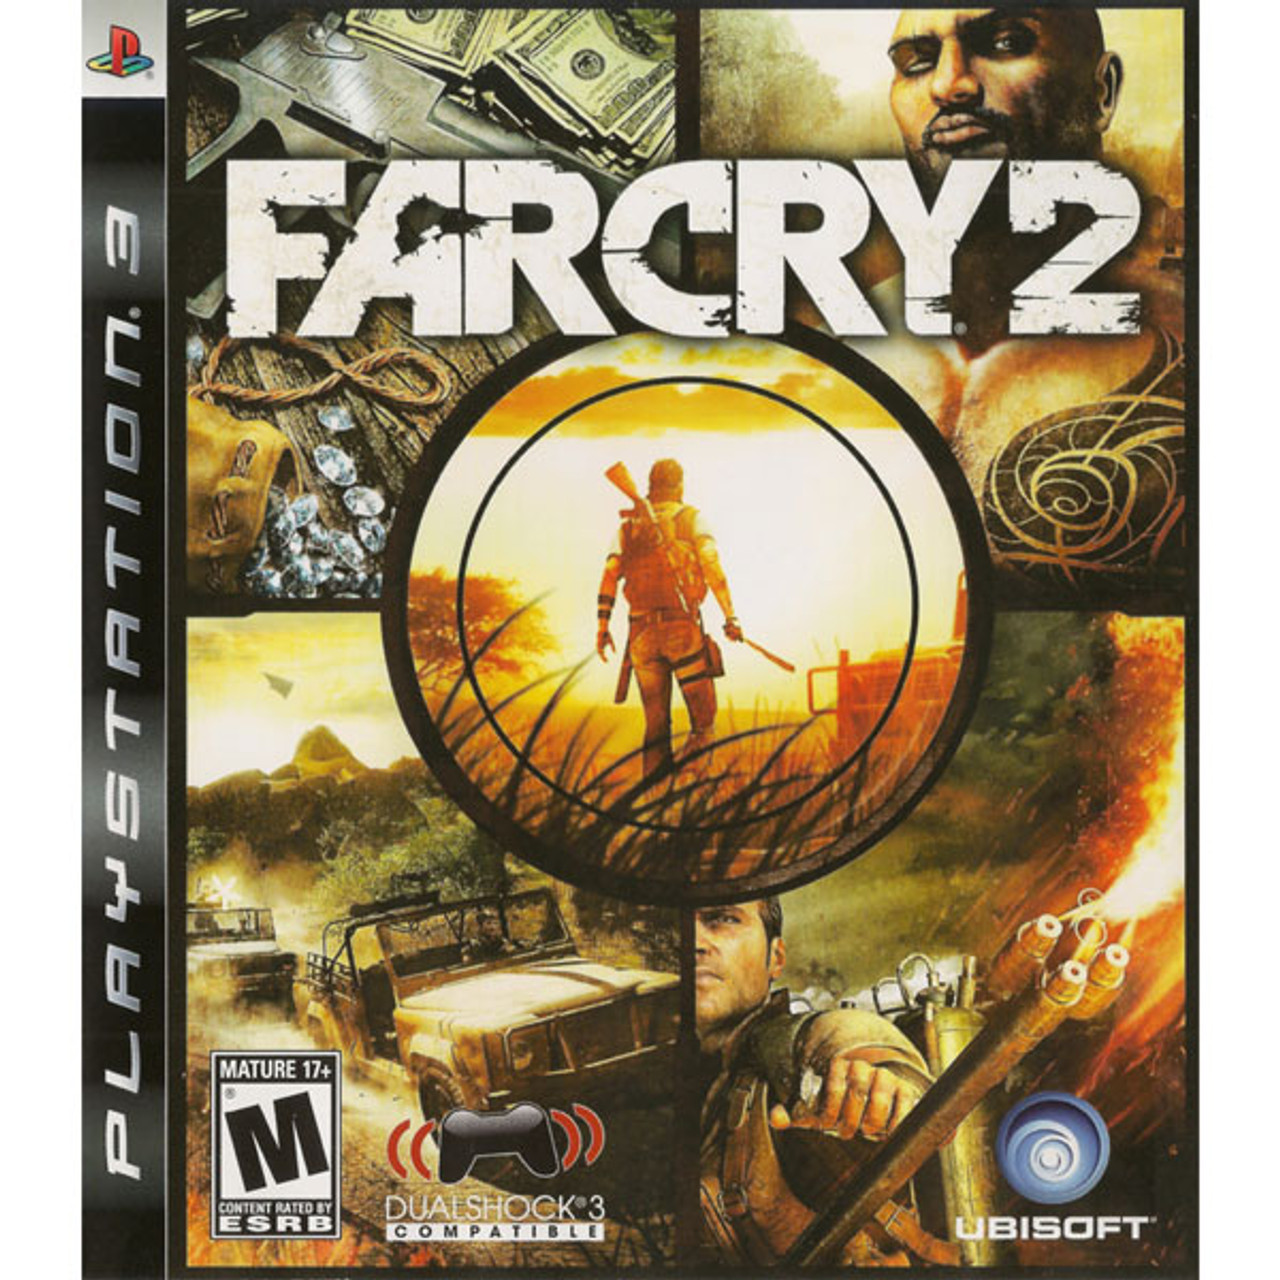 Far Cry 3 and Far Cry 4 Xbox 360 Double Pack Brand New Factory Sealed